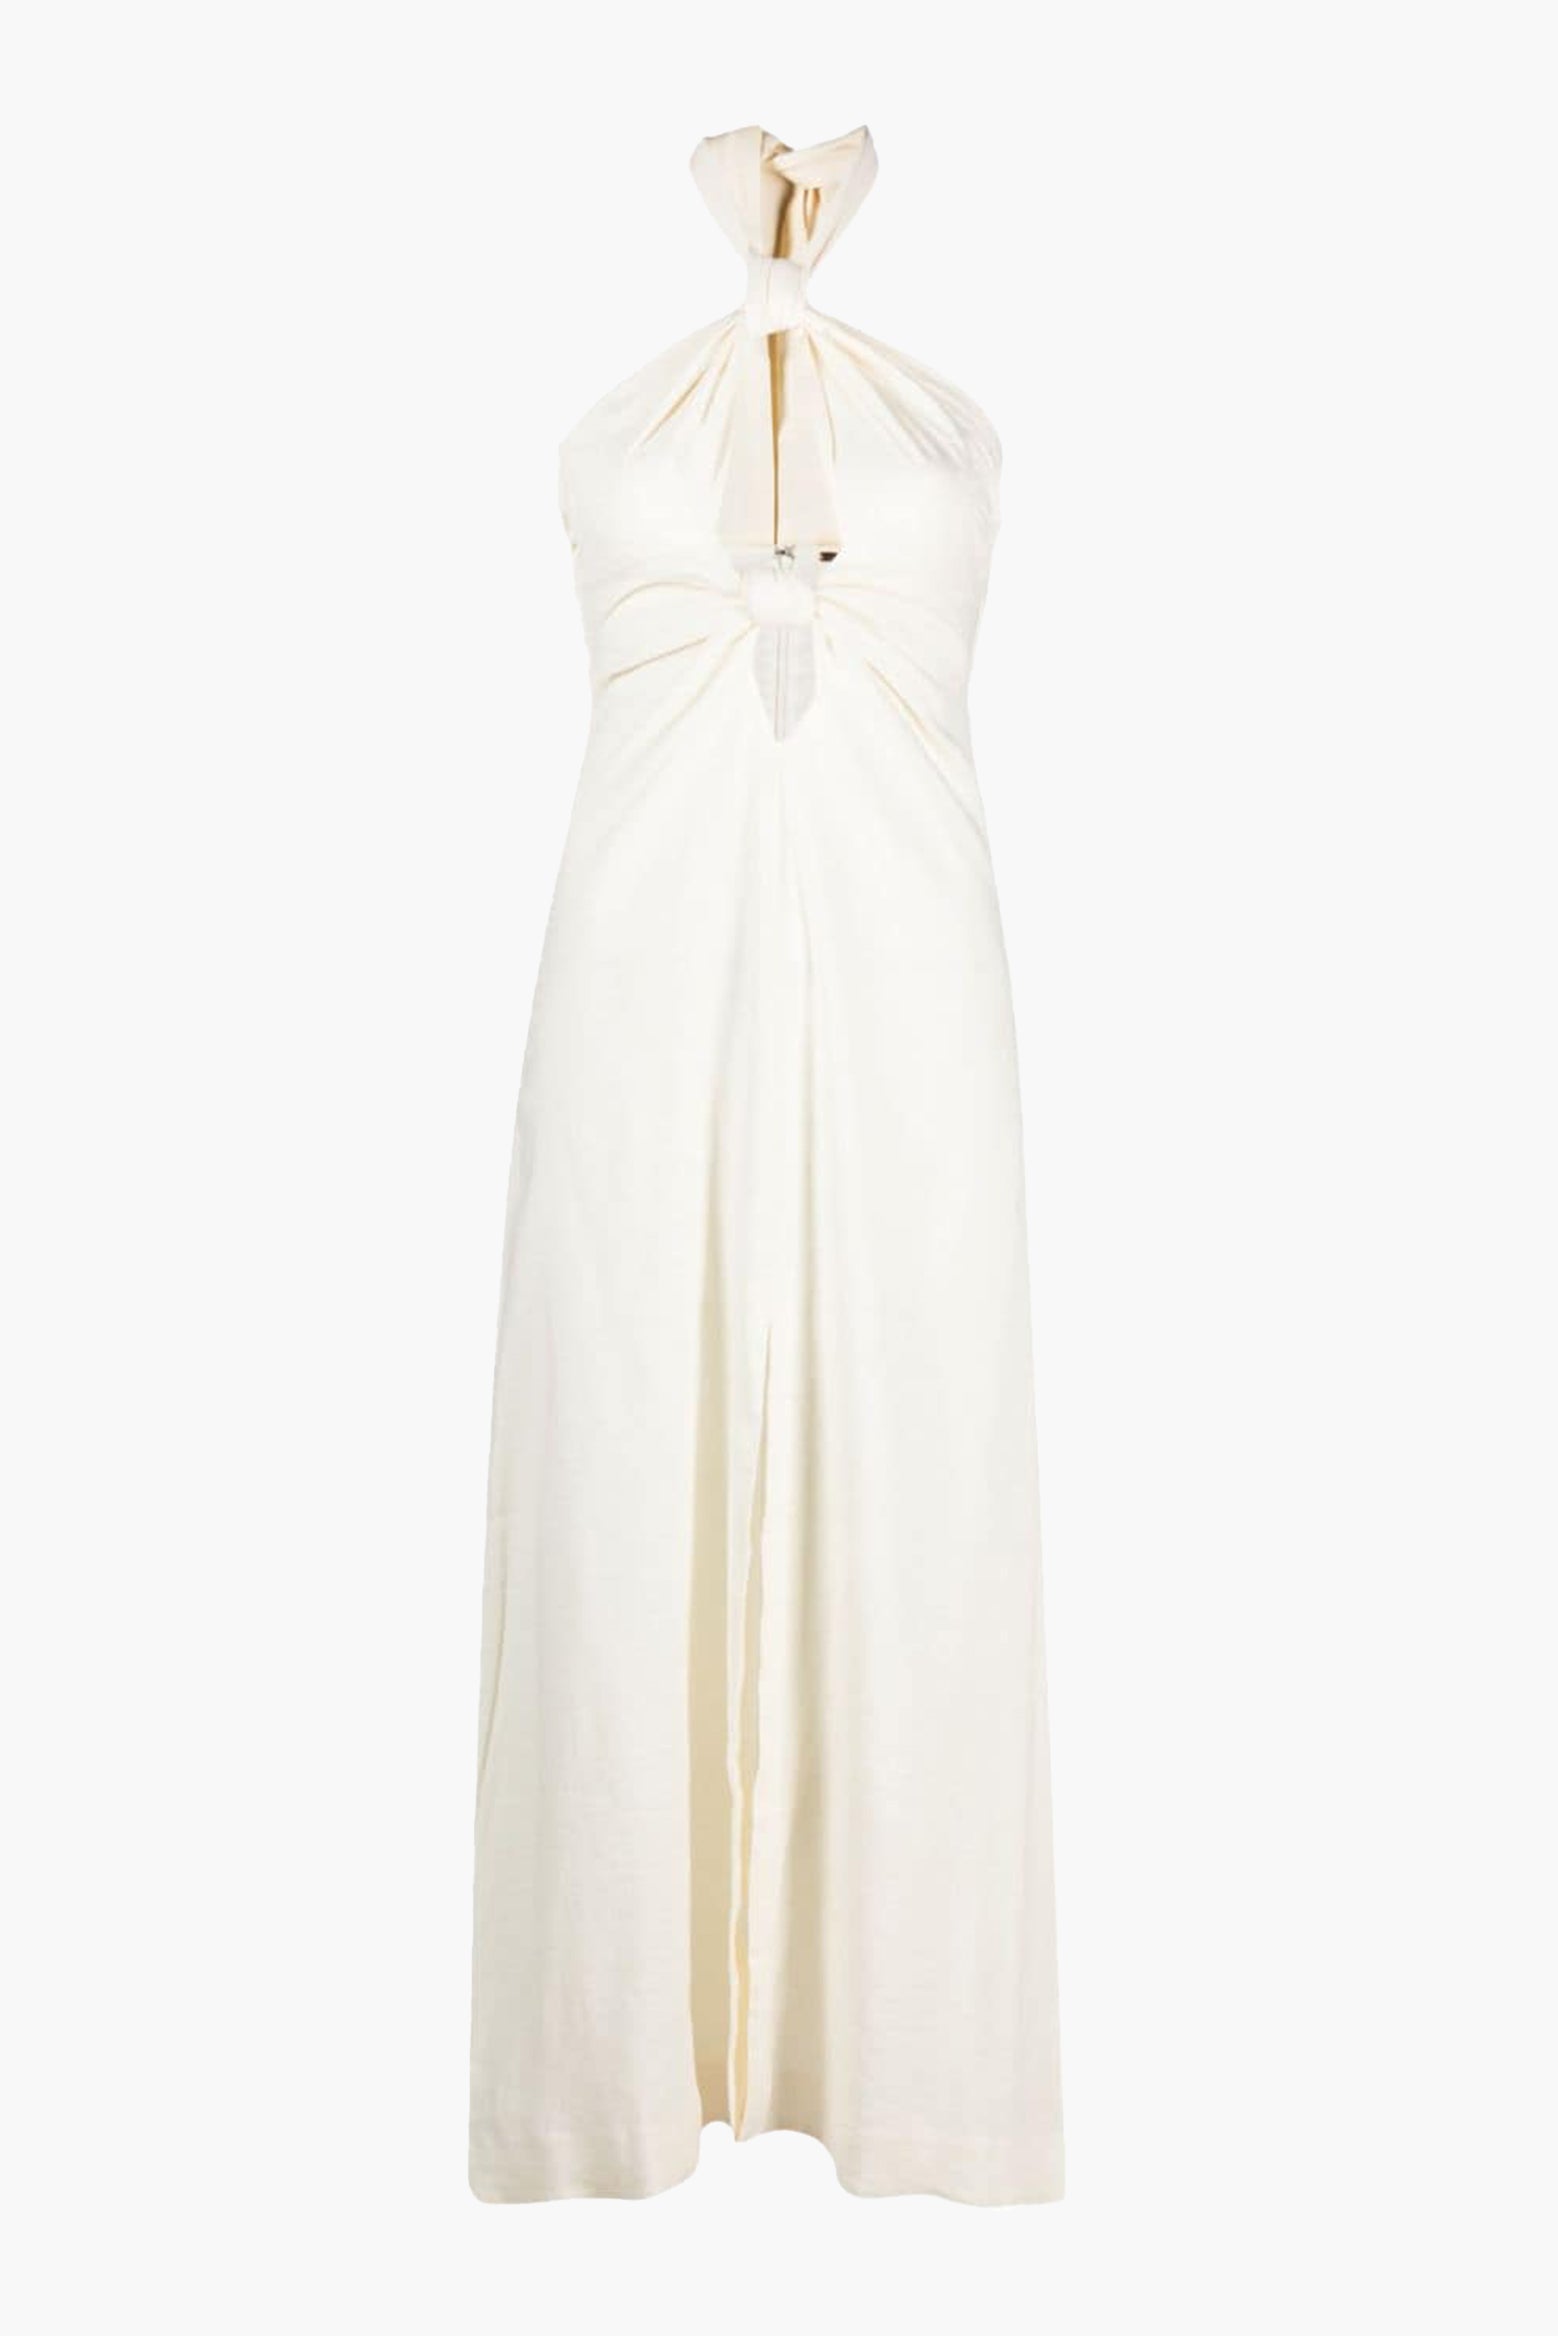 The Cult Gaia Susana Midi Dress in Off White available at The New Trend Australia